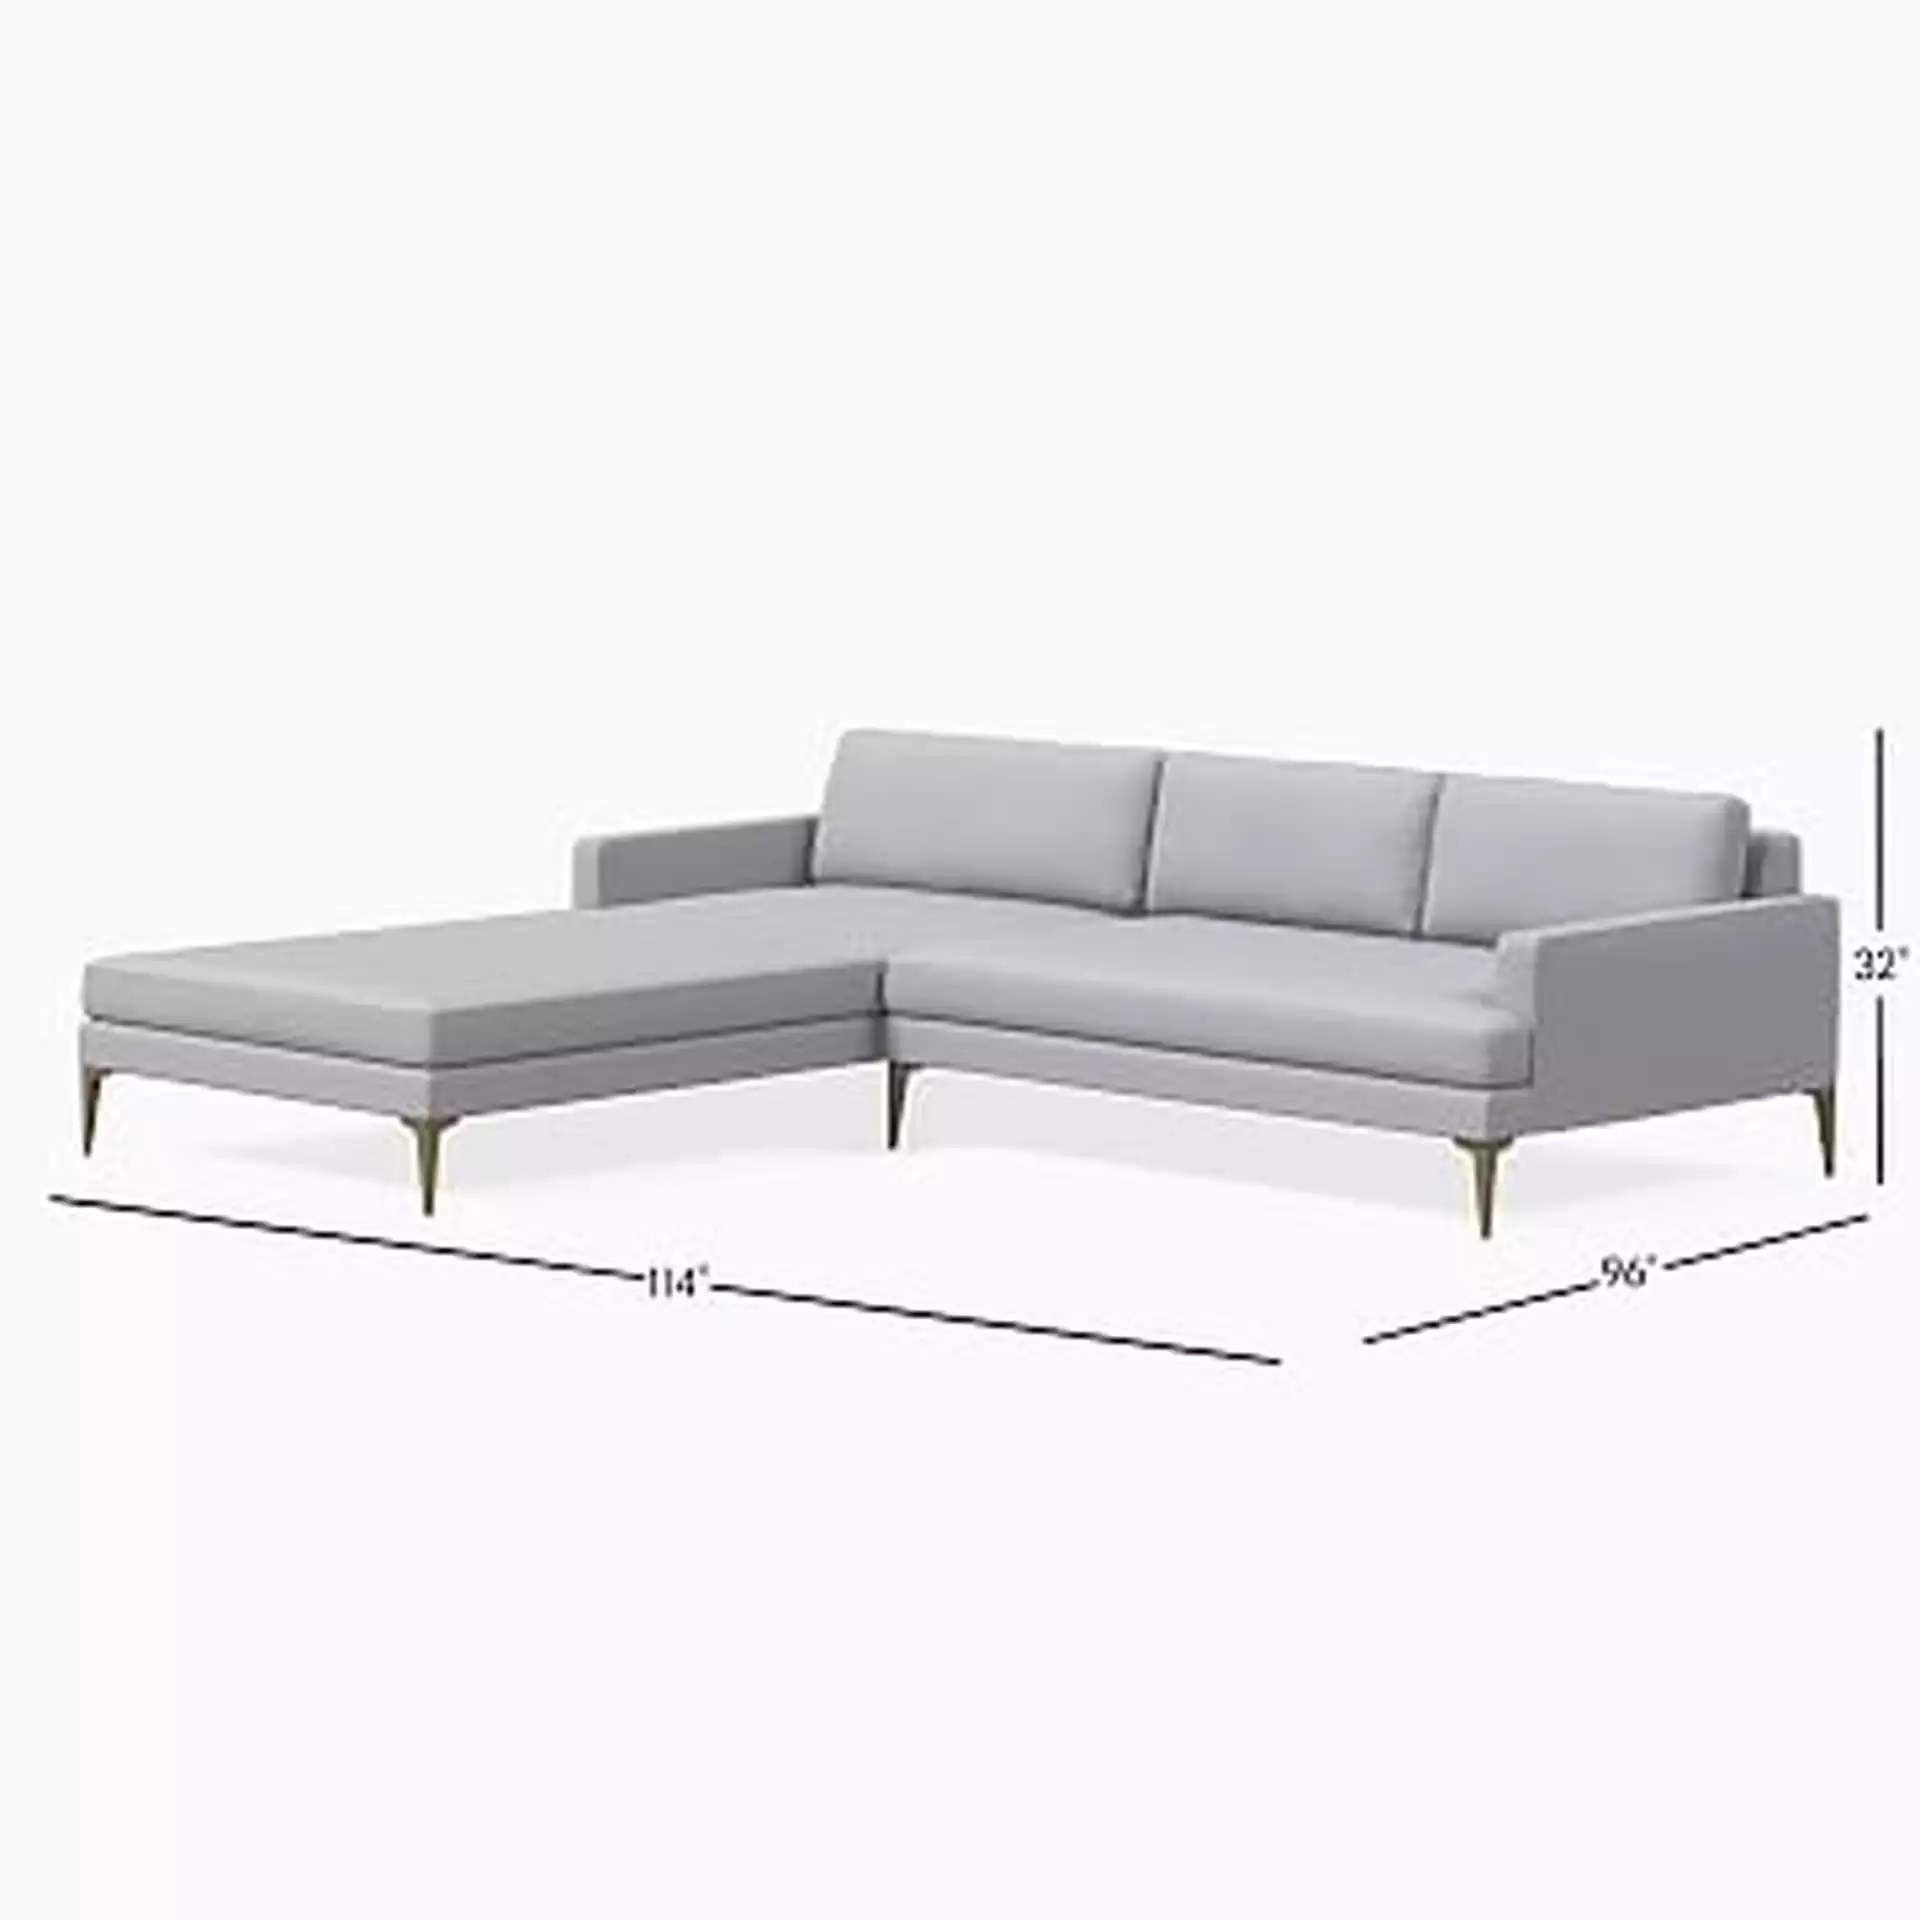 Andes Sectional Set 20: Right Arm 2 Seater Sofa, Left Arm Chaise, Chenille Tweed, Frost Gray, Blackened Brass